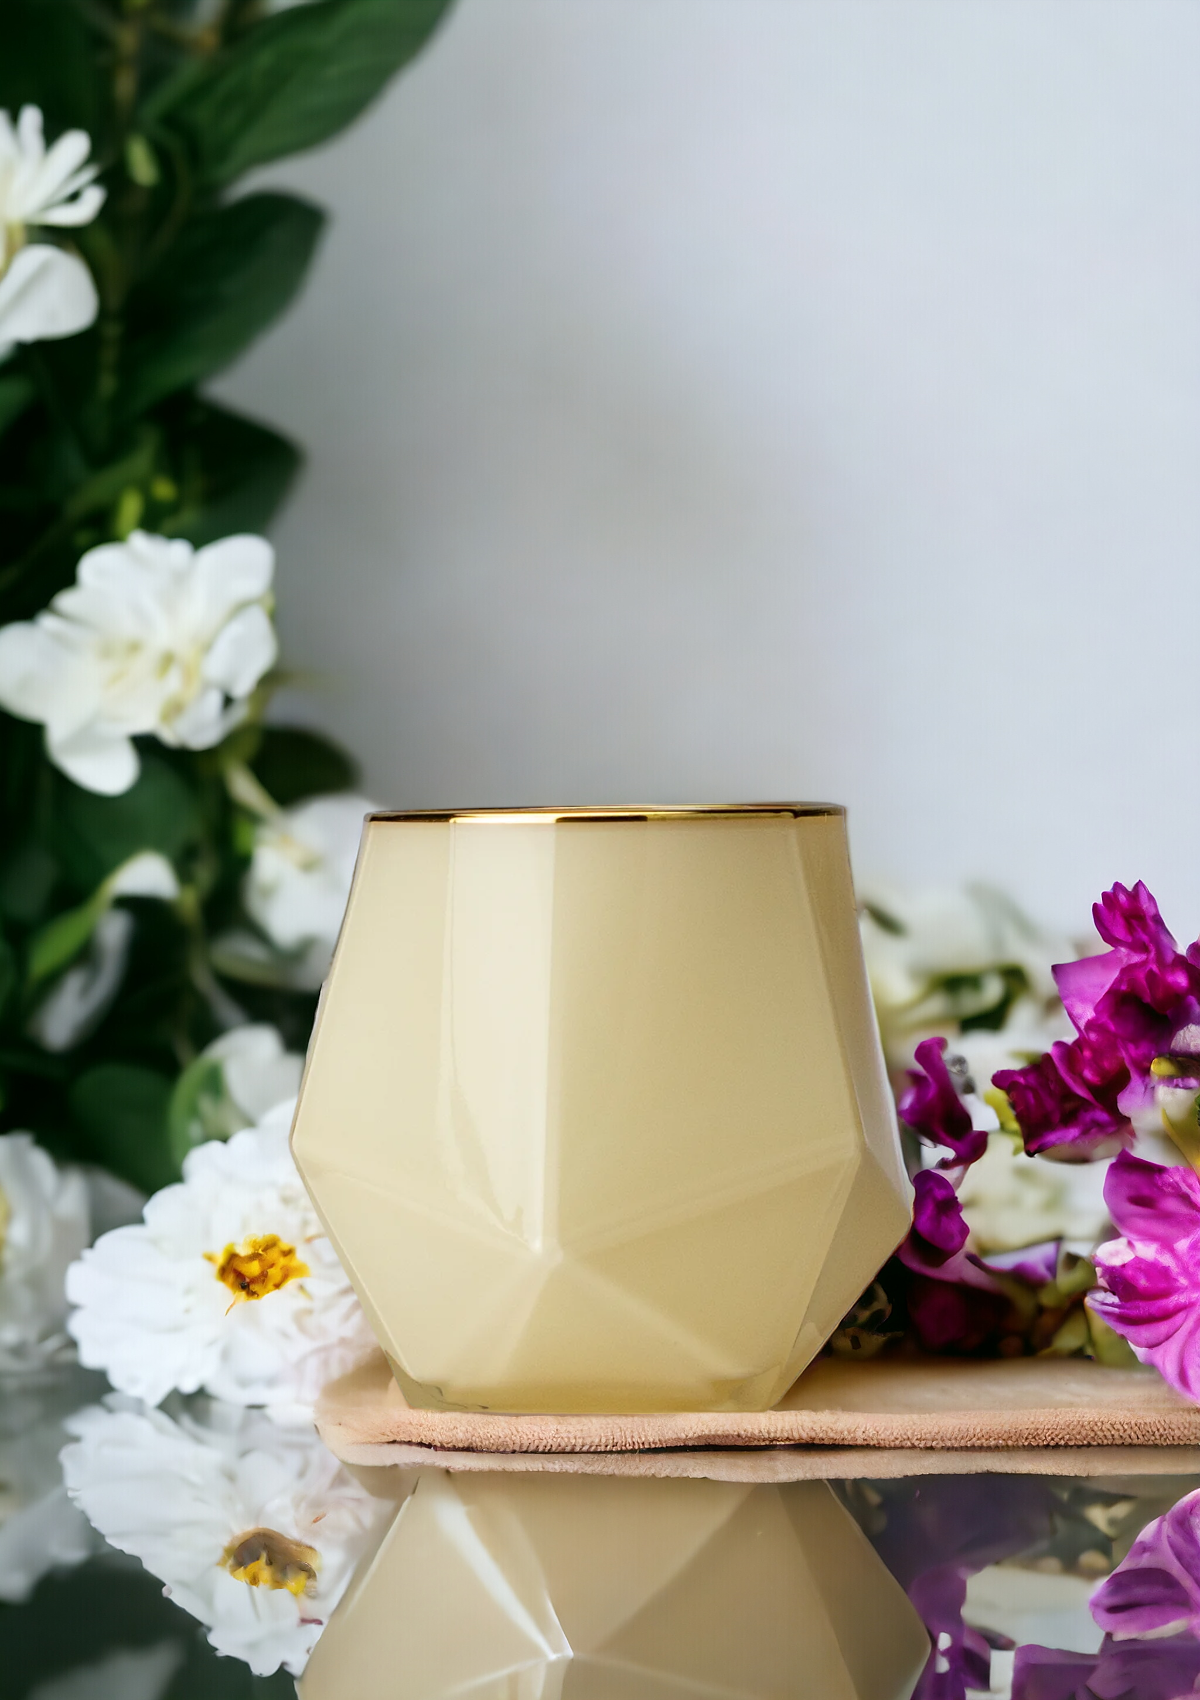 Honey Drenched Blooms 16oz Luxury Candle CREAM + GOLD RIM - Fresh florals, sweet honey, and white oak.